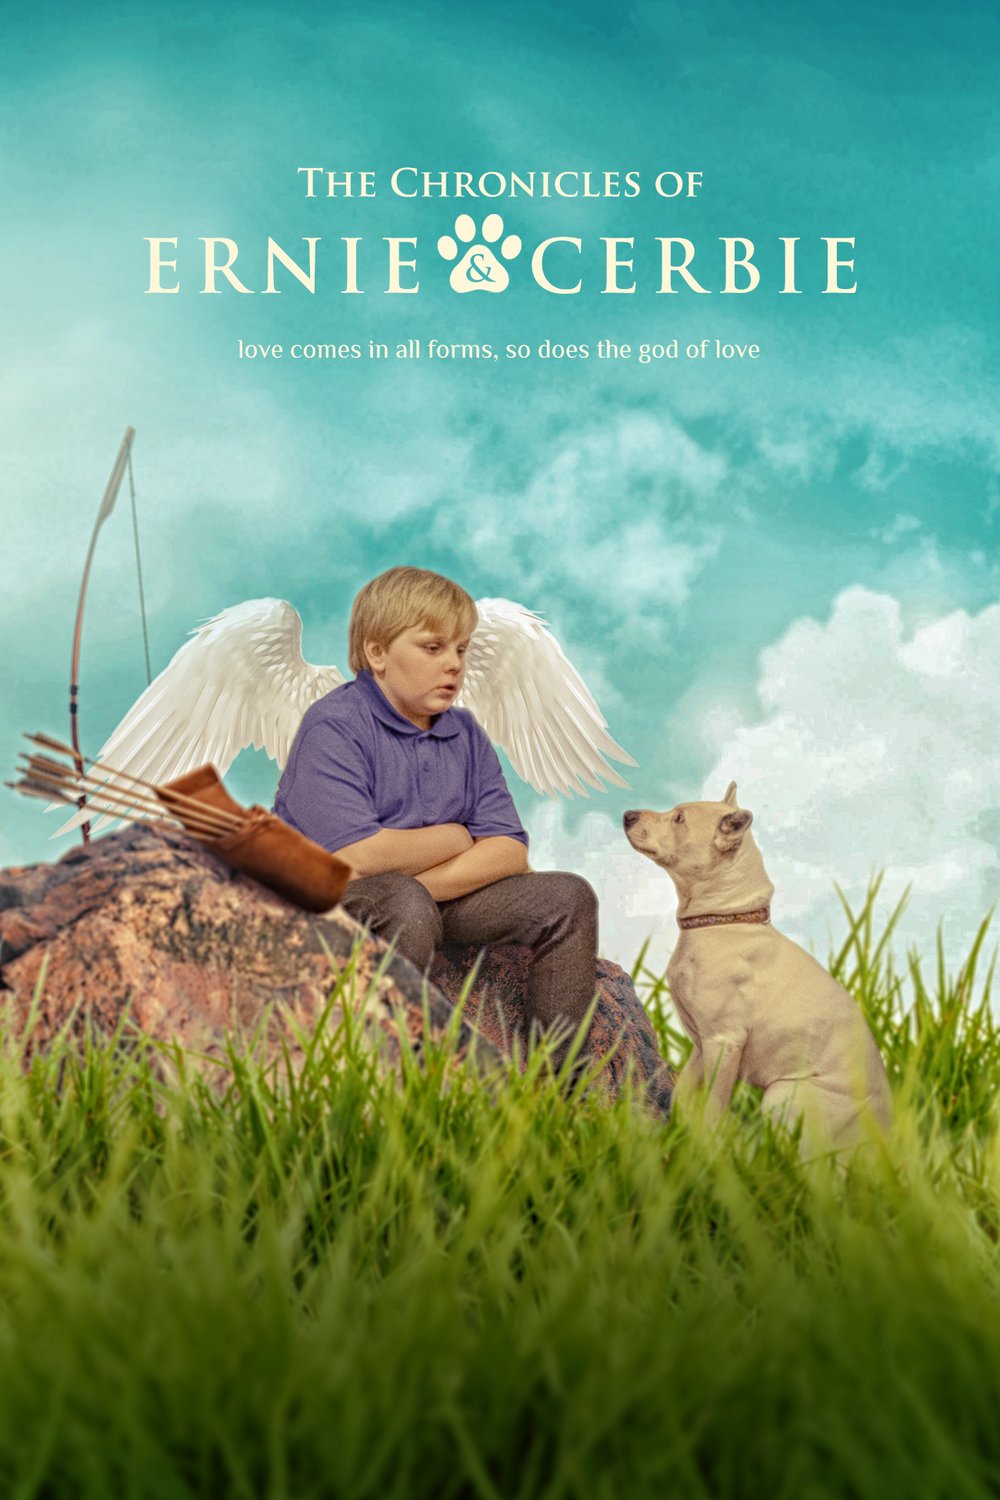 Poster of the movie Ernie and Cerbie